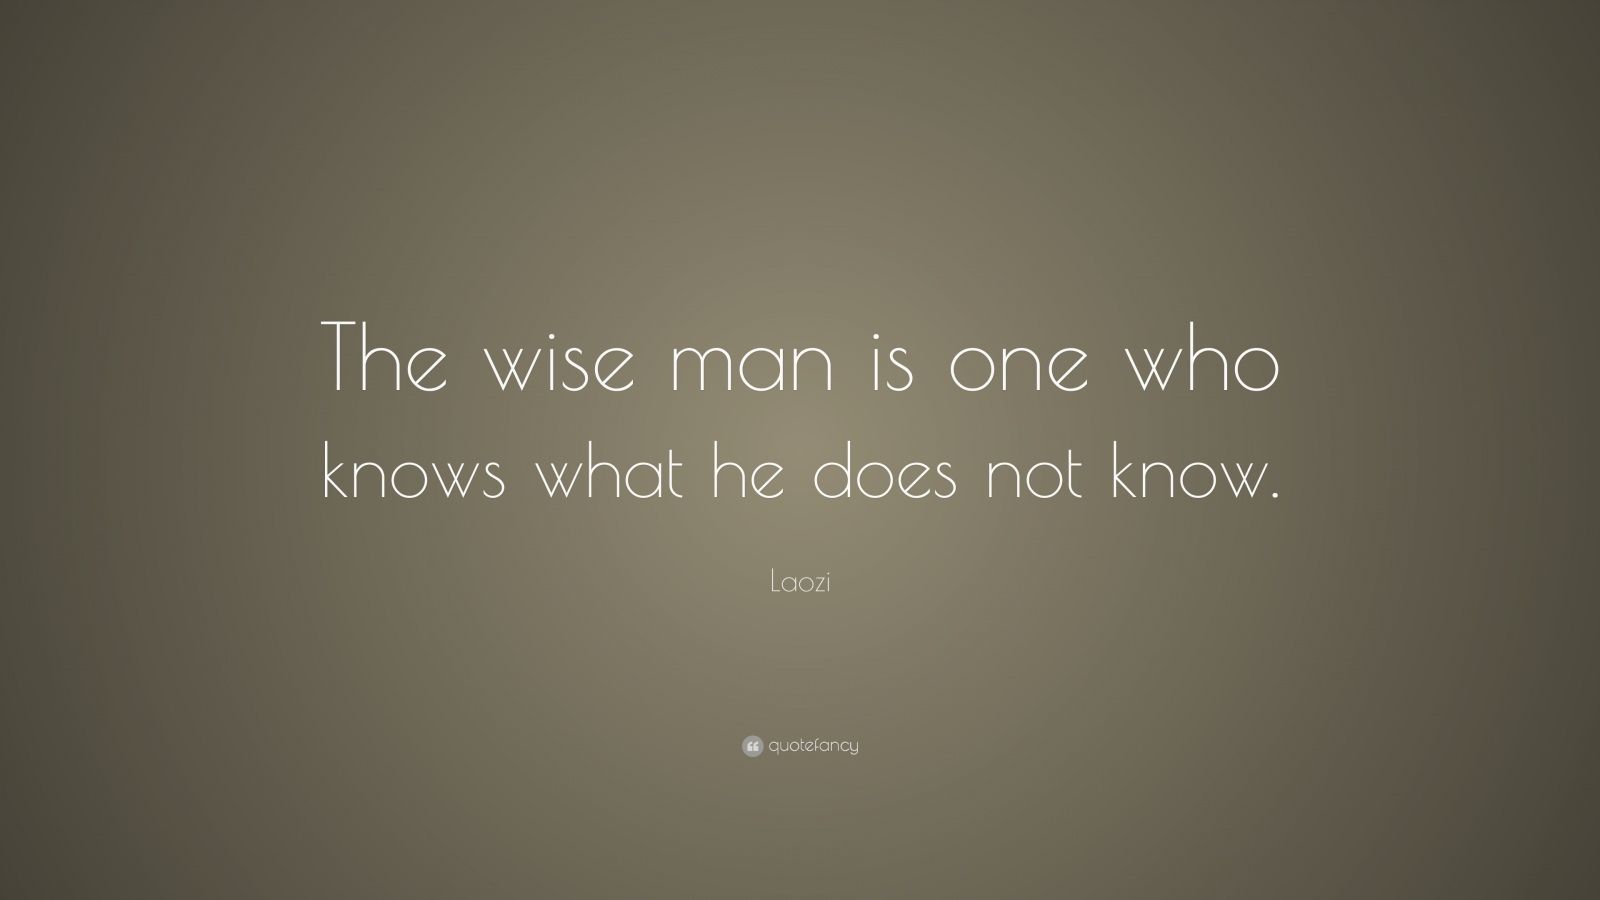 Laozi Quote: “The wise man is one who knows what he does not know.” (9 ...